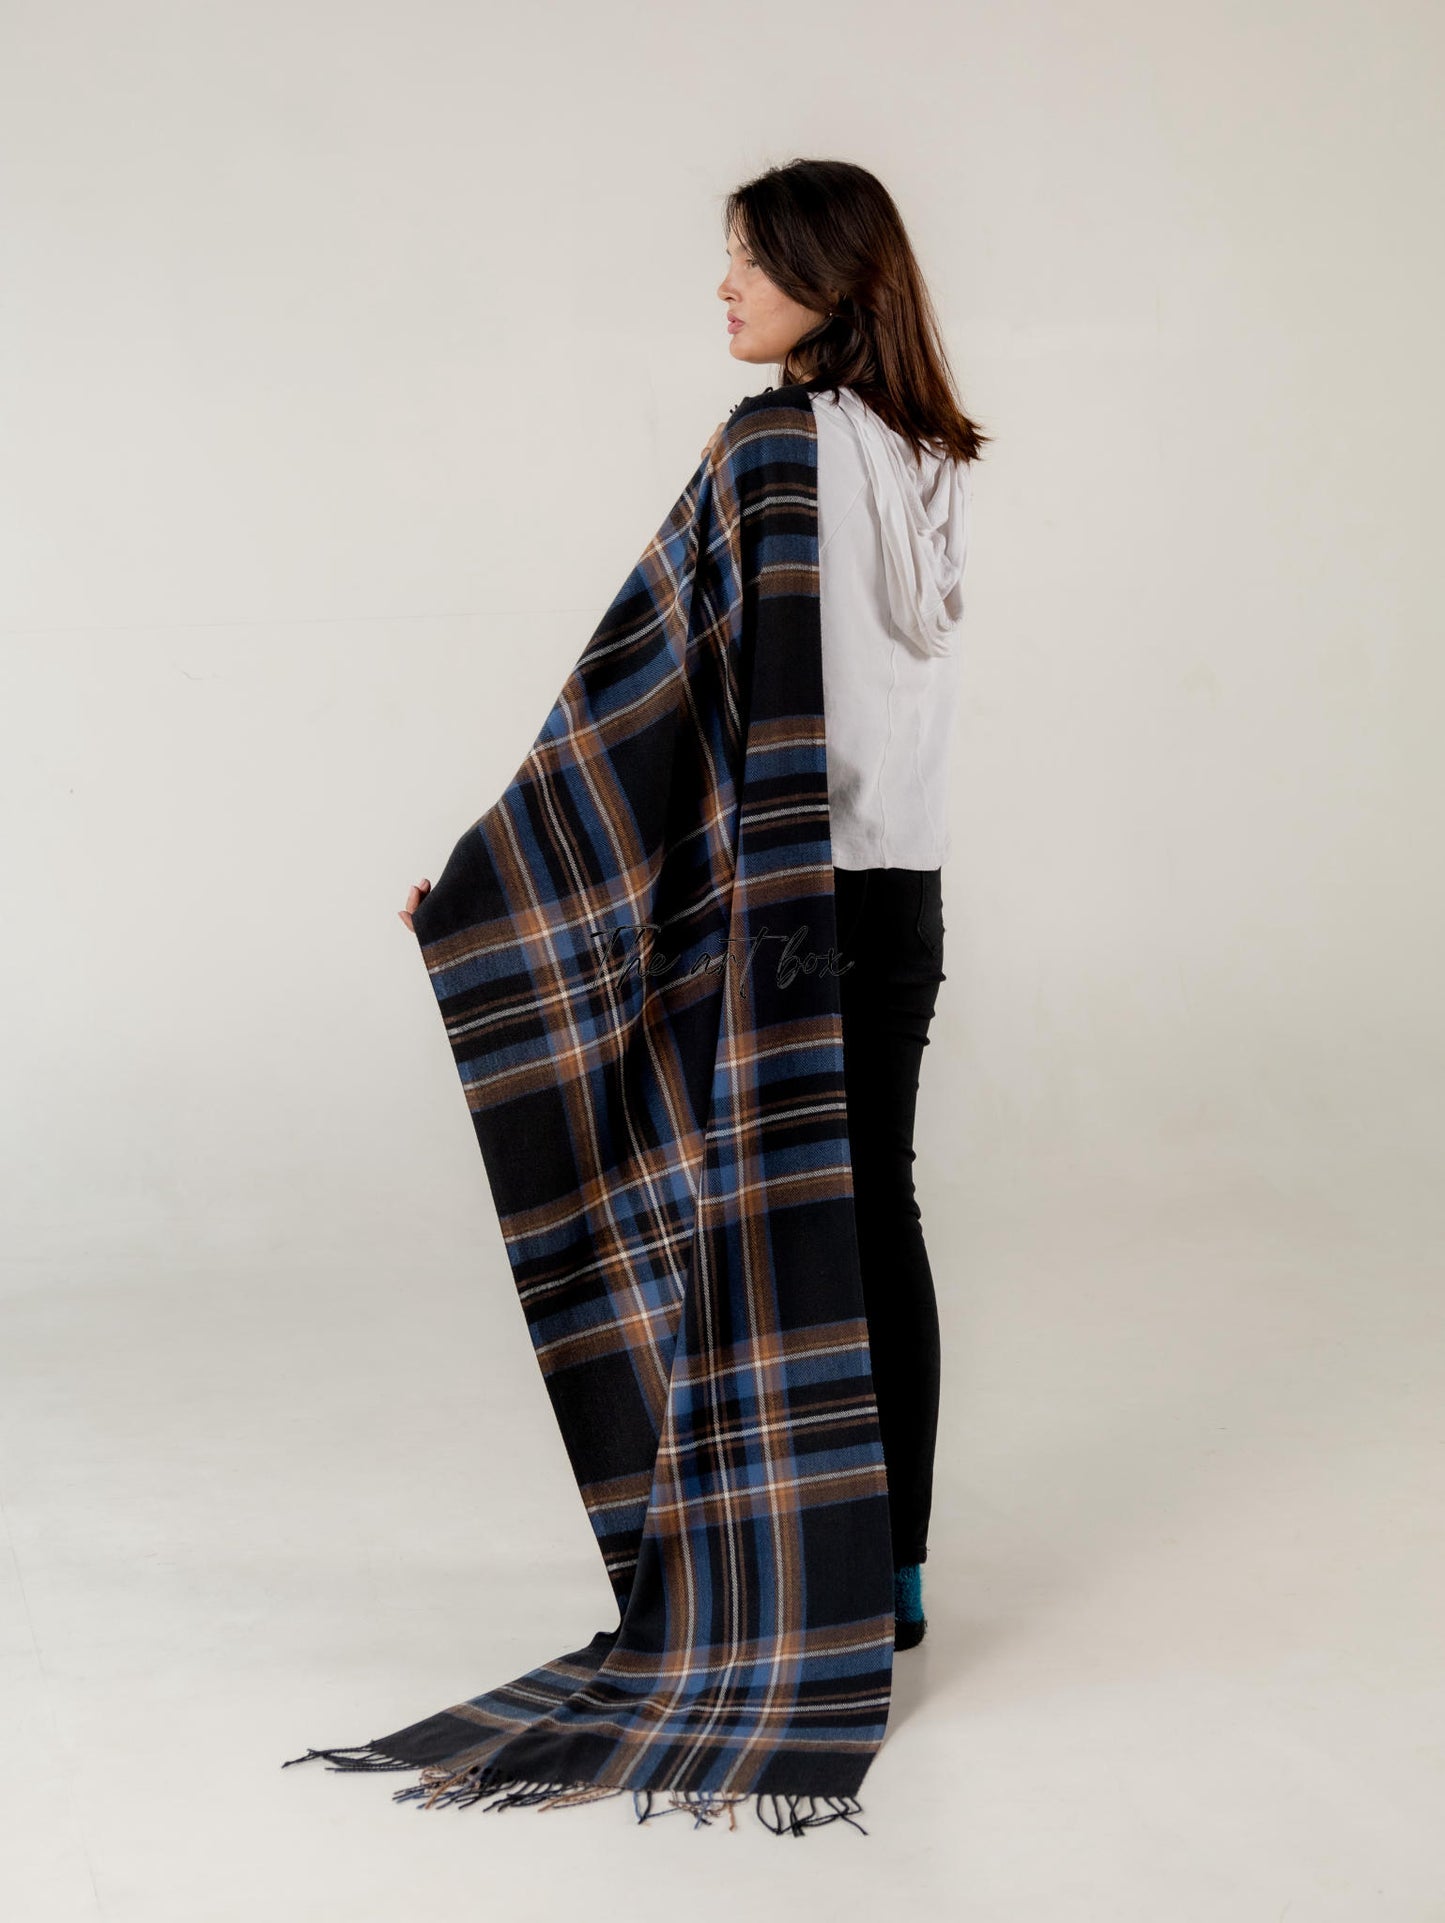 Soft and Stylish: Cotton Woolen Scarves You'll Adore